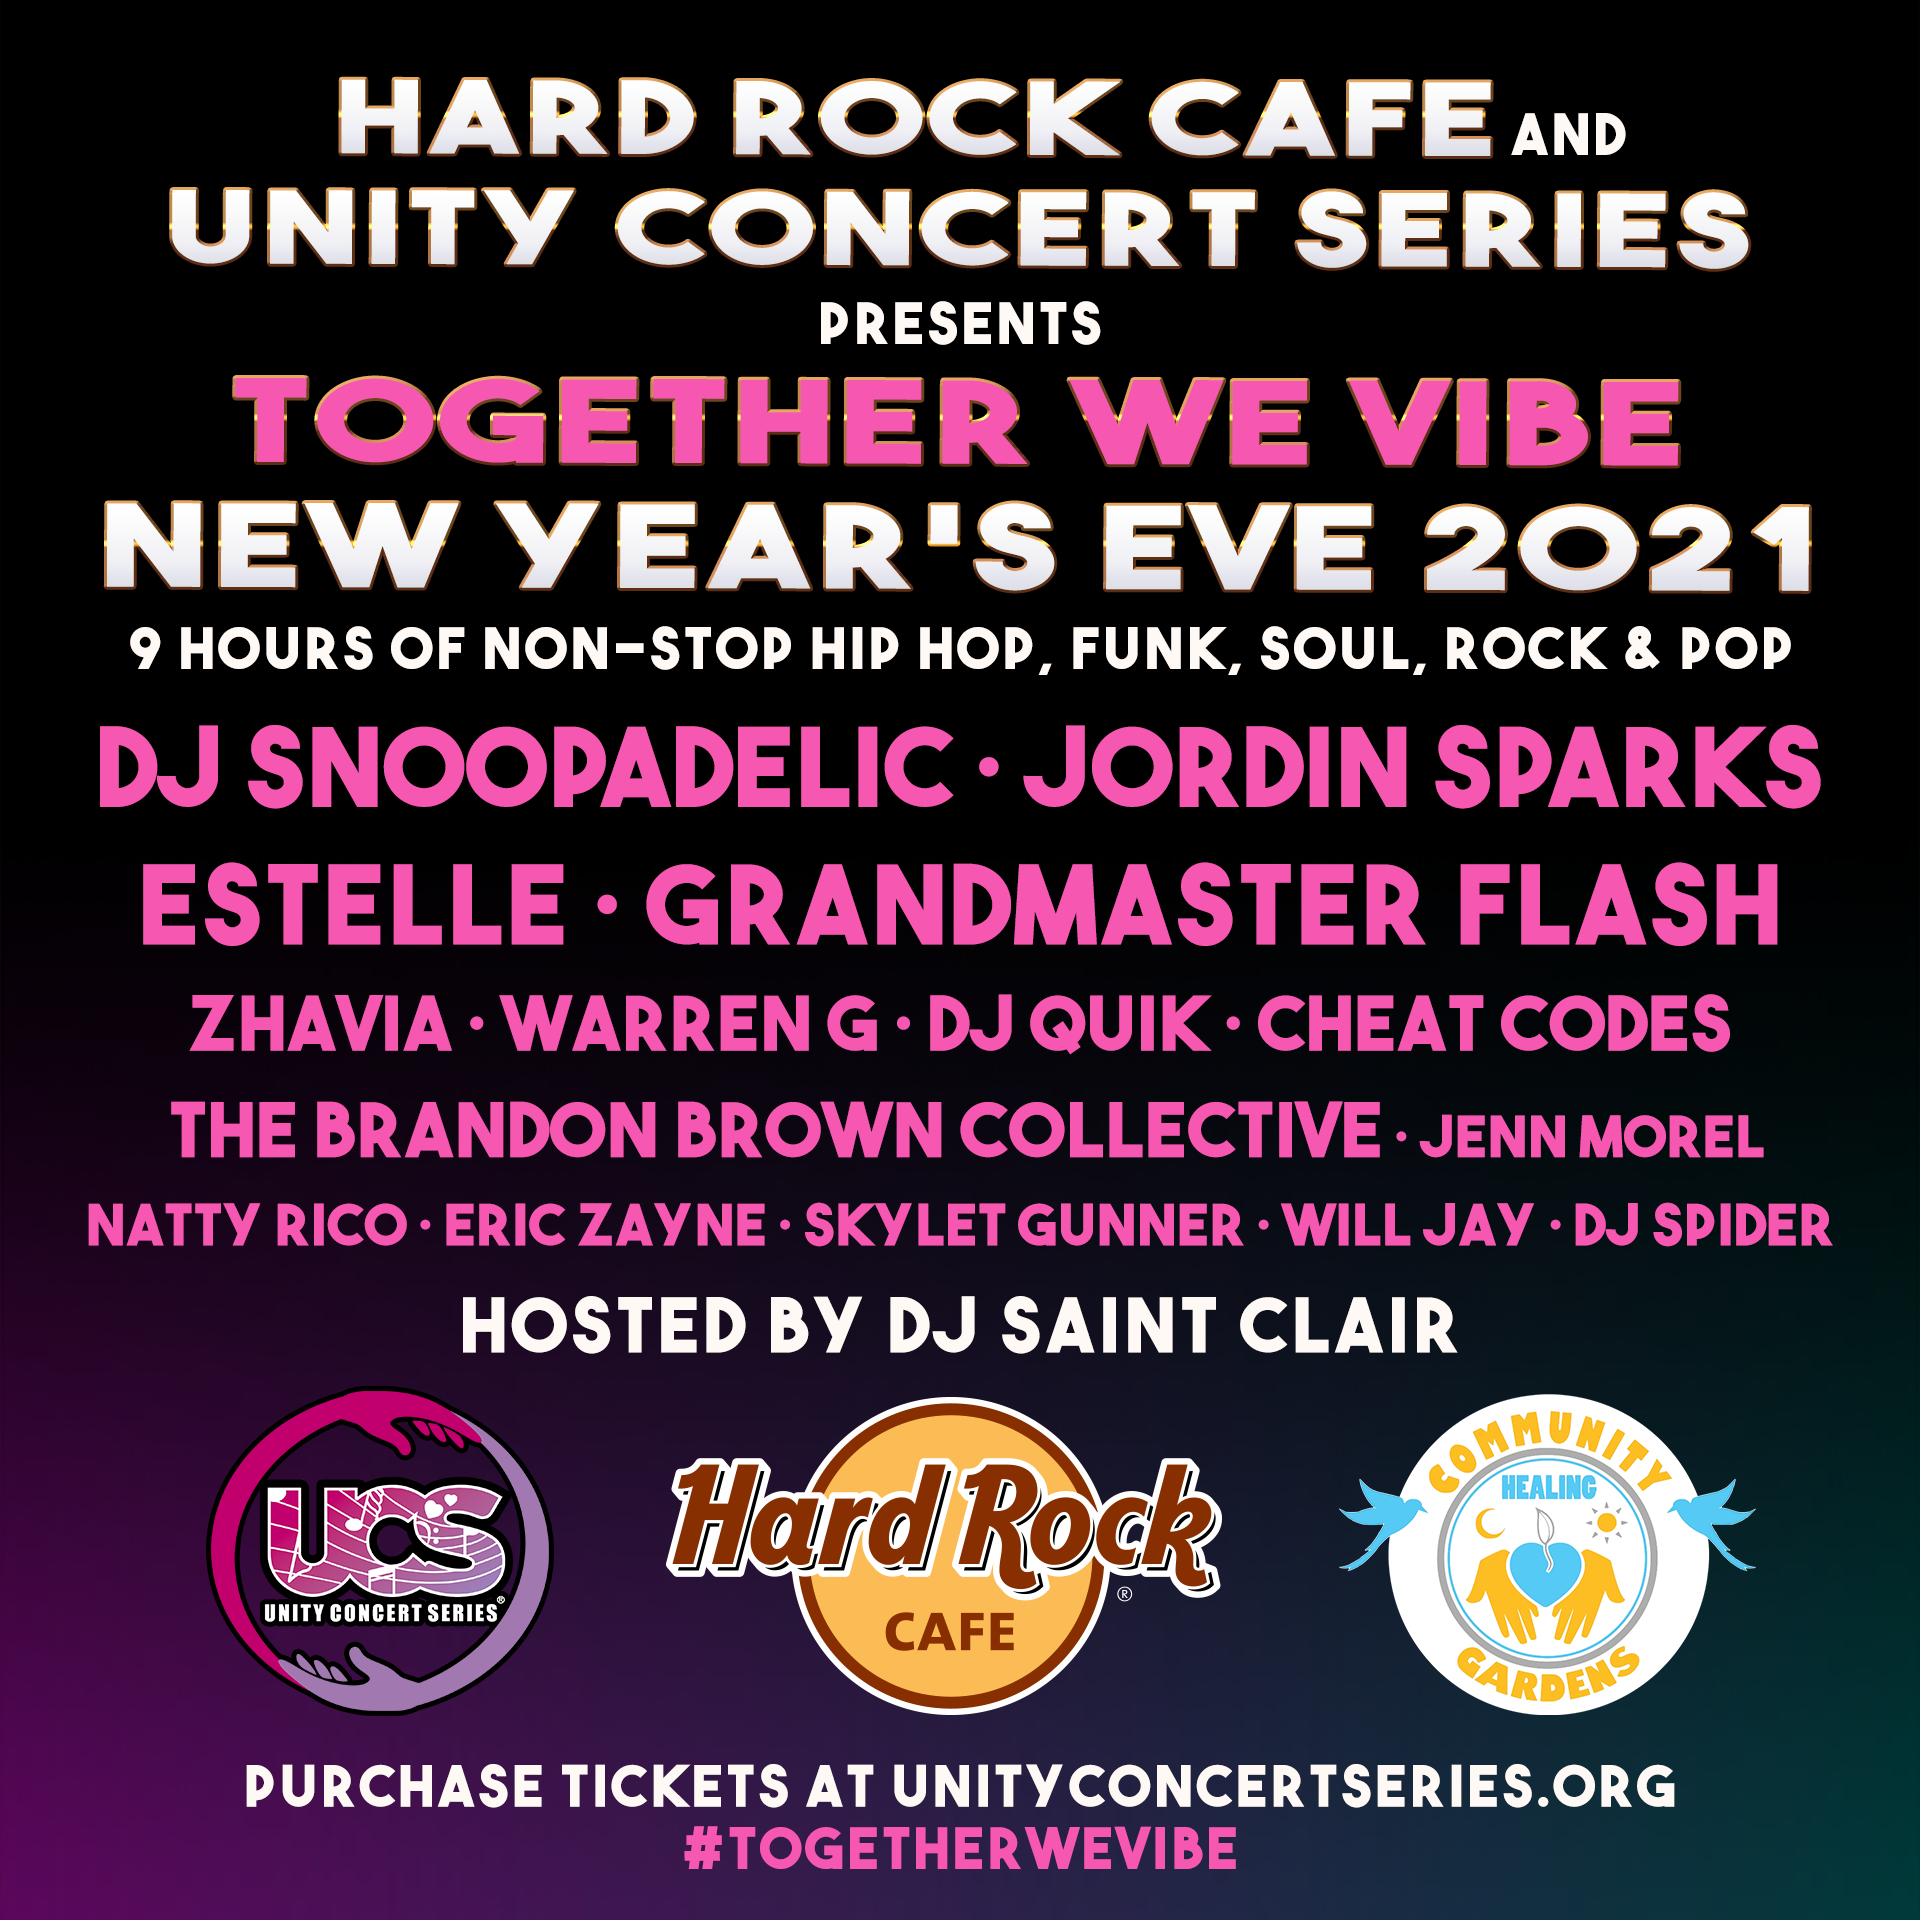 Geek insider, geekinsider, geekinsider. Com,, ring in 2021 with the hard rock cafe and unity concert series, news